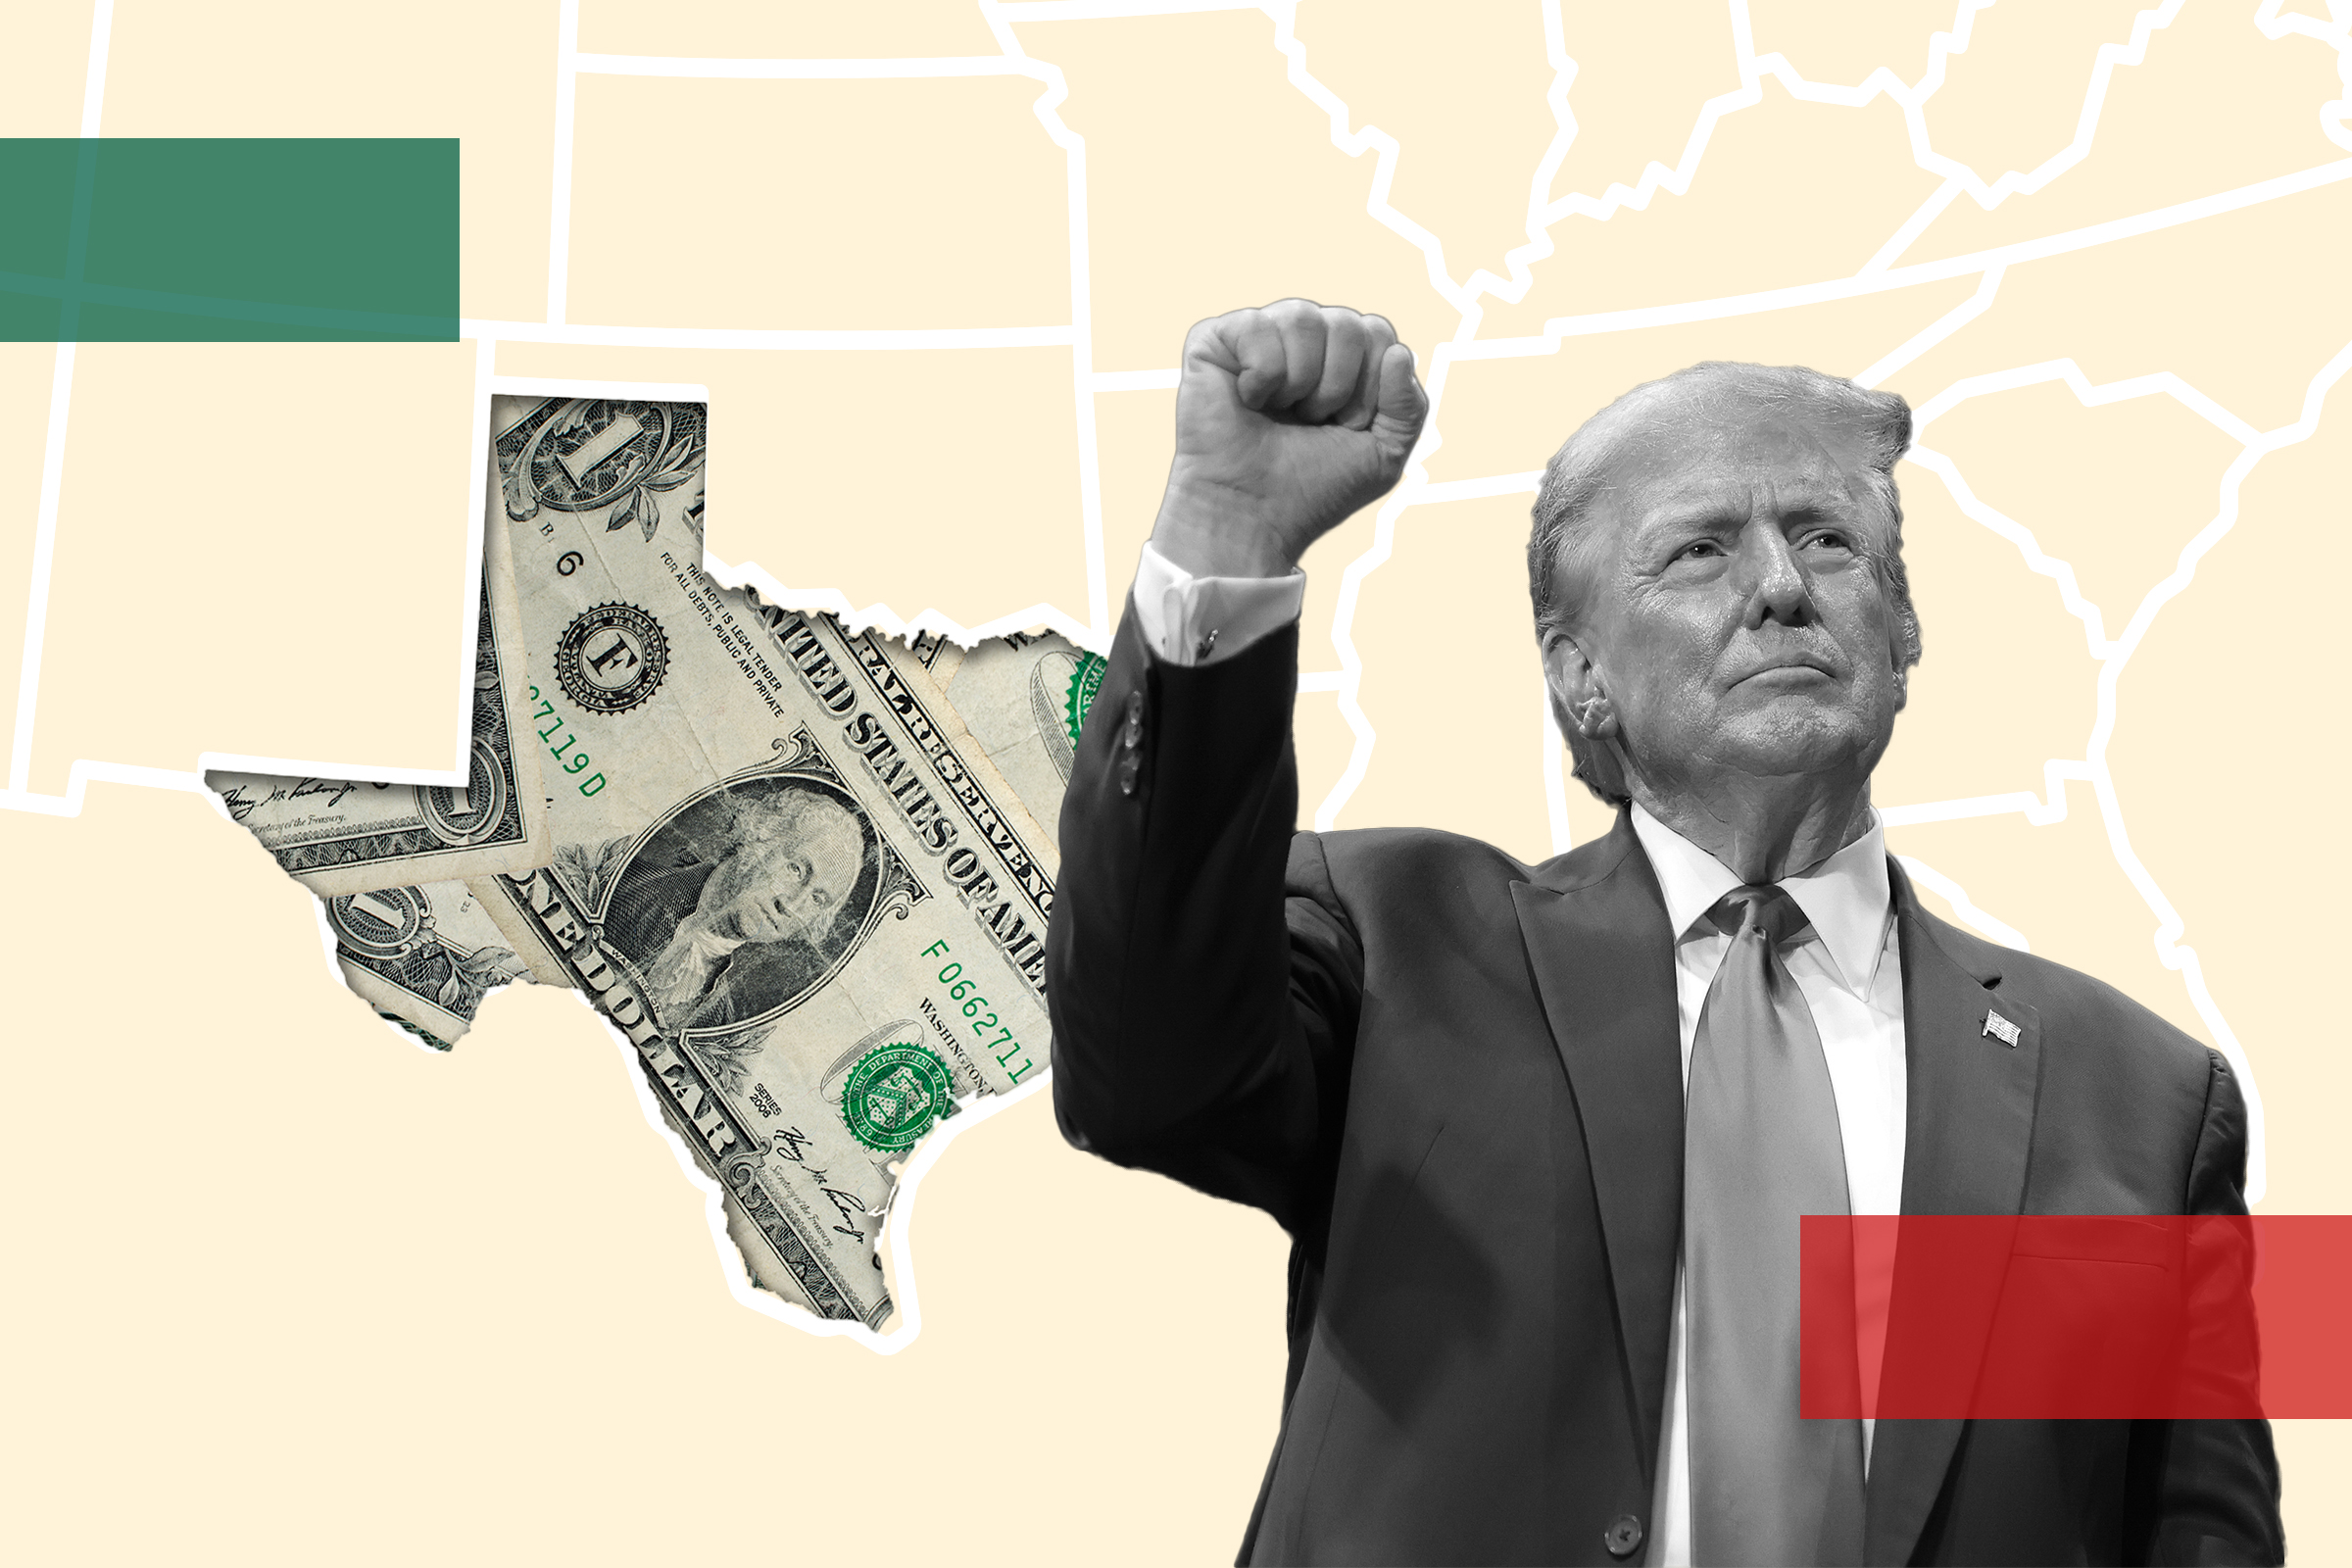 texas poised to lose billions in investment if donald trump elected